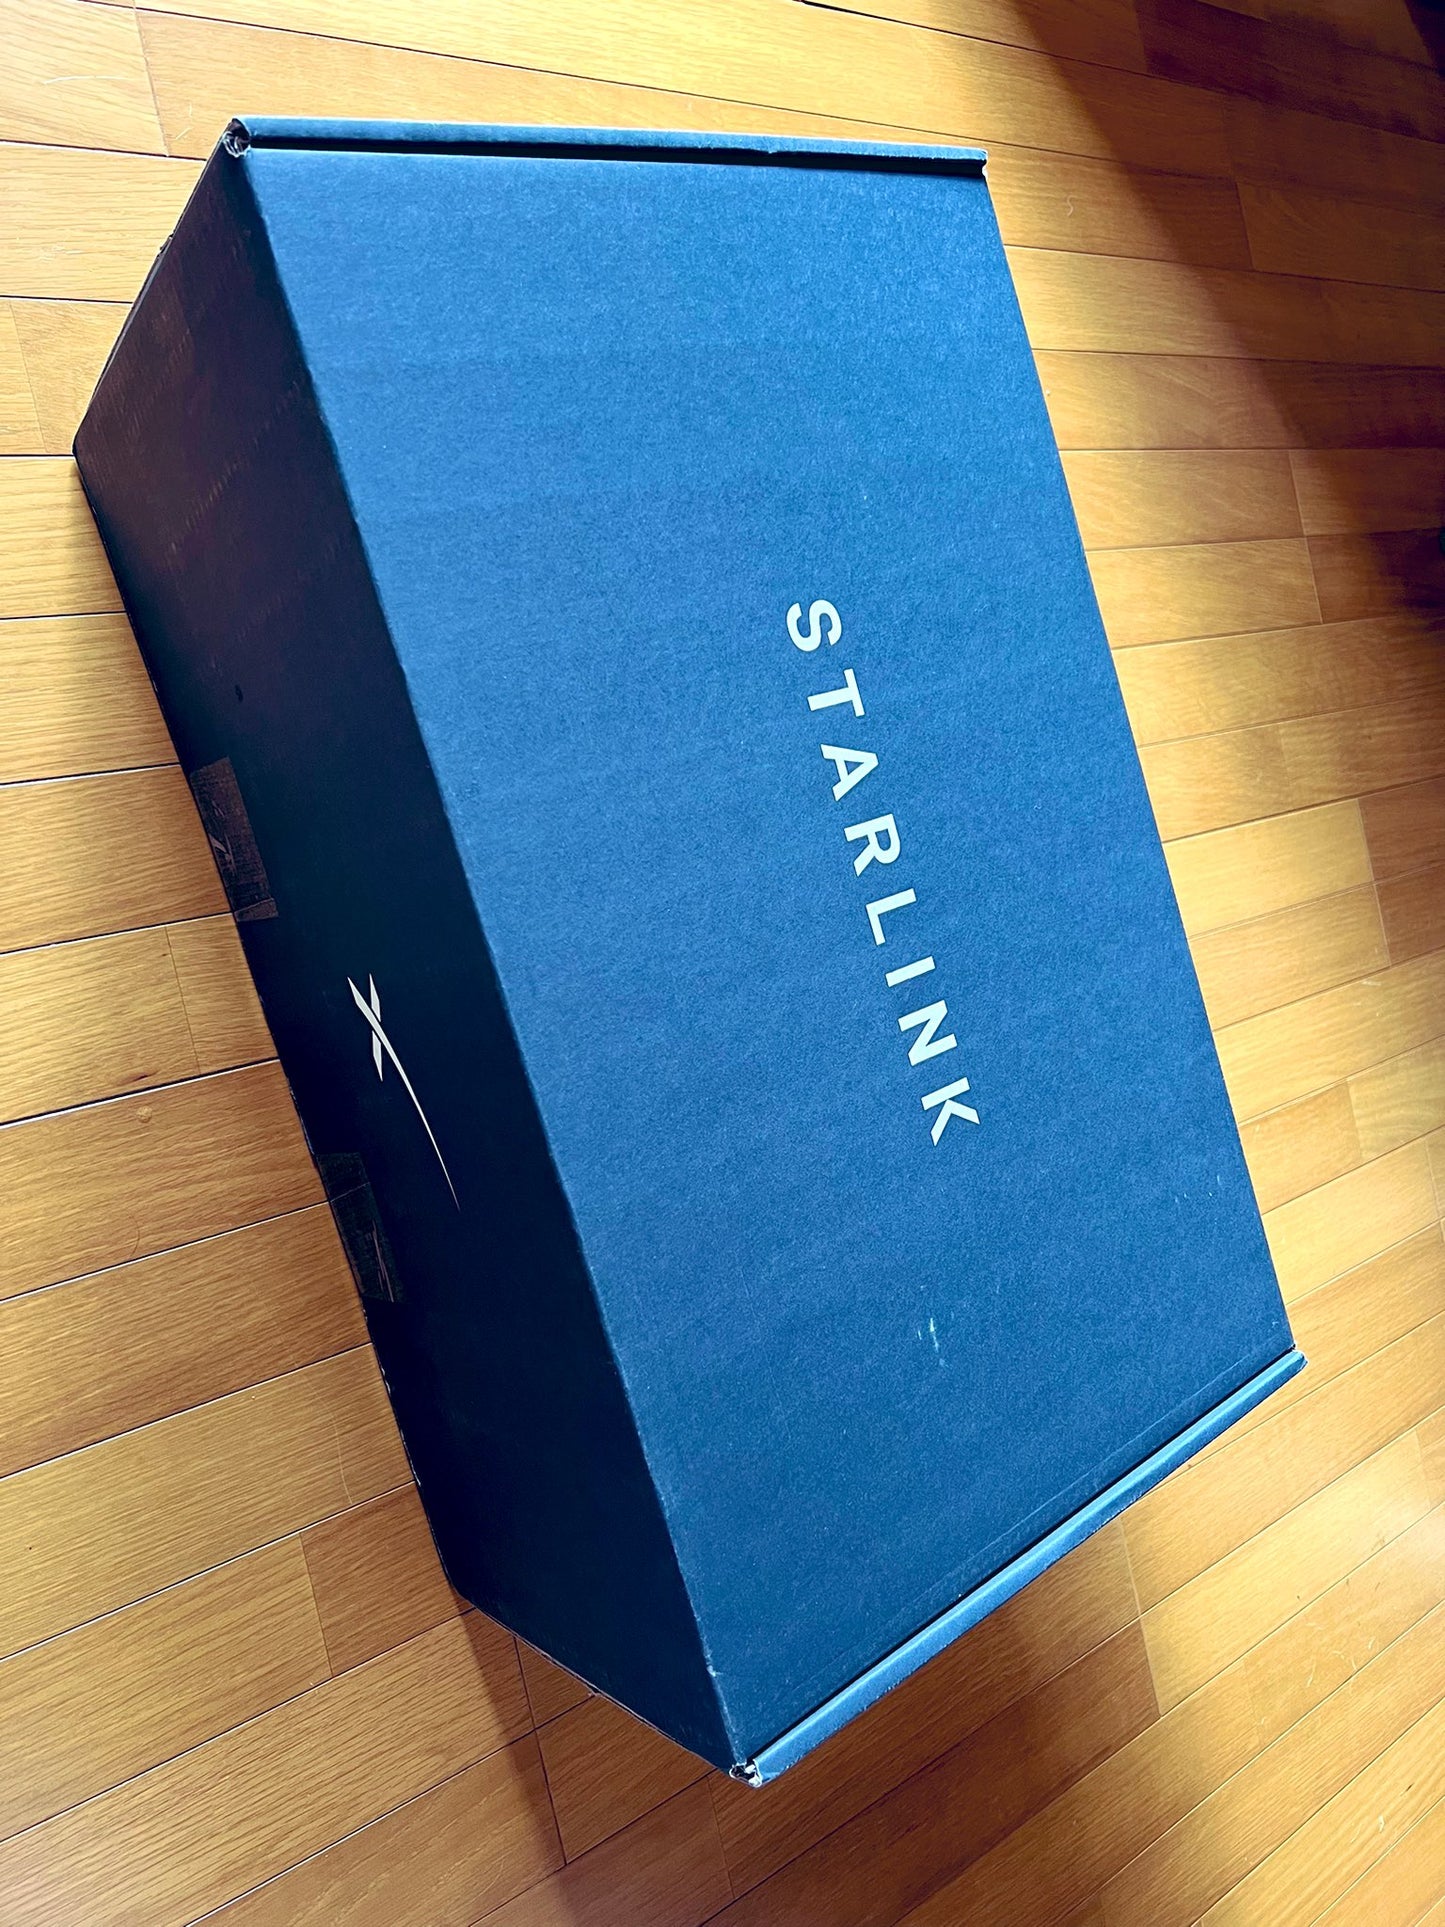 Starlink Starlink Satellite Internet Communications Full set of antennas, base, cables, and Wi-Fi router ready to use